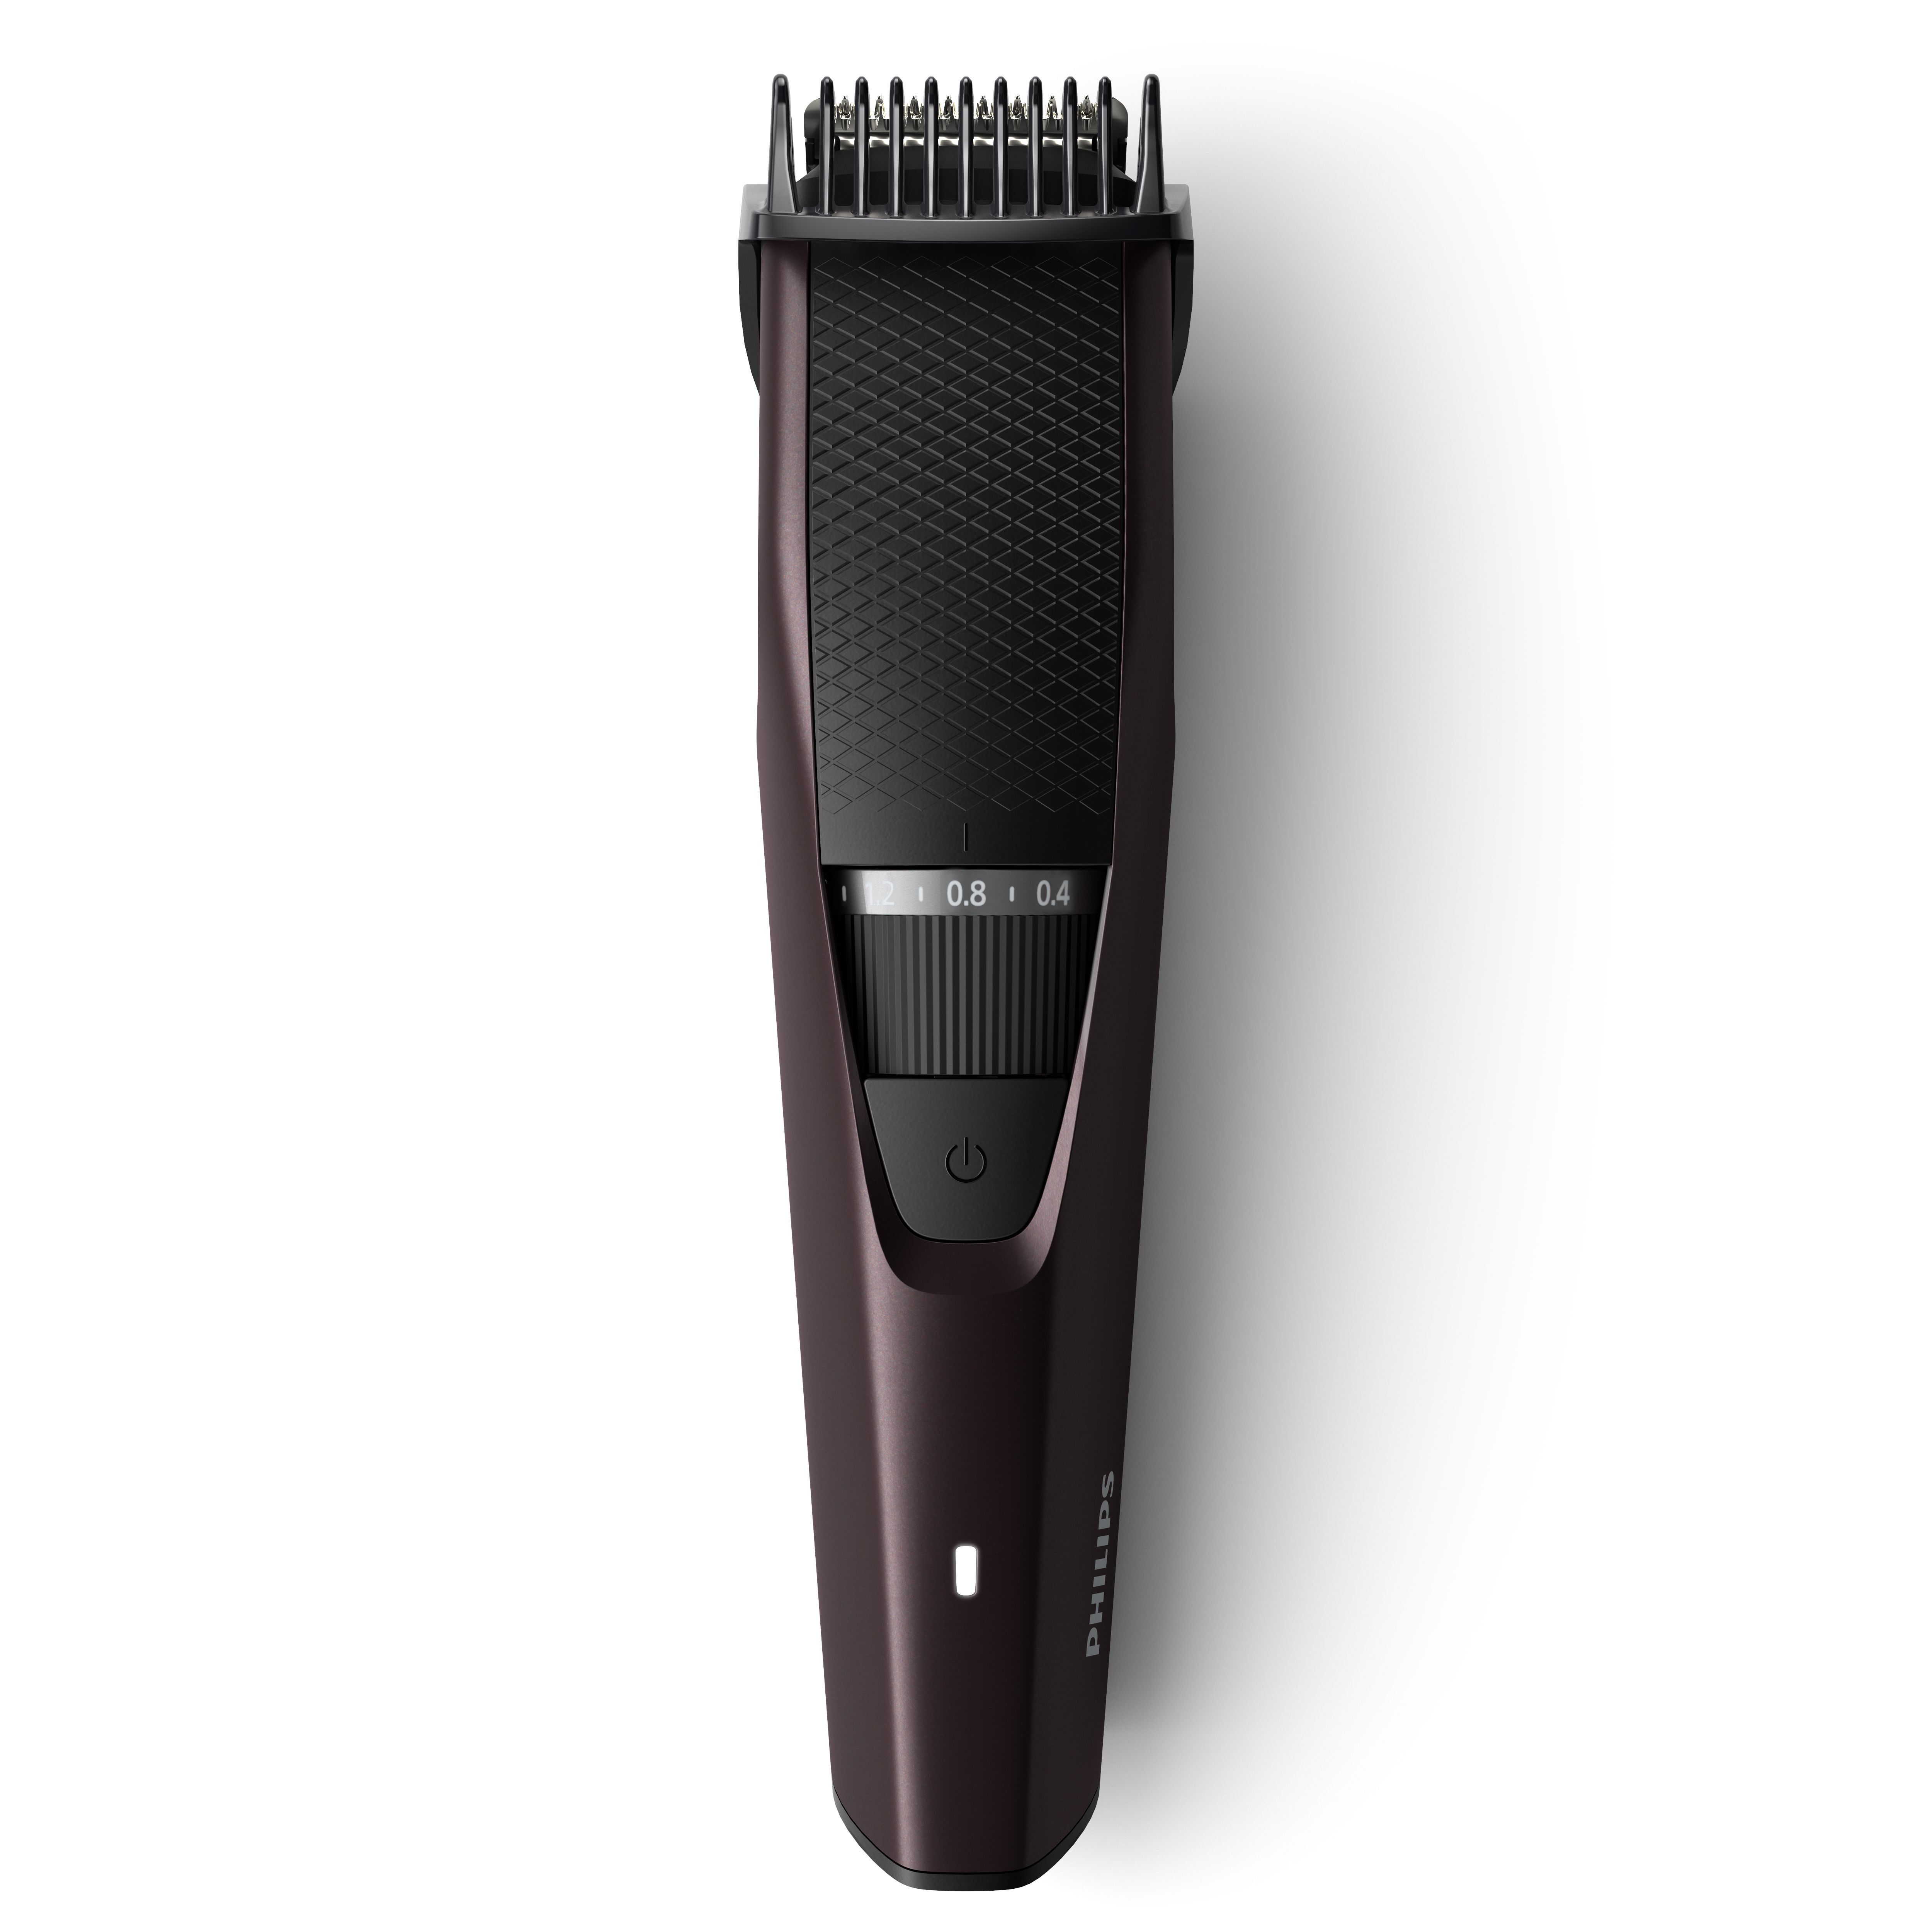 Buy Philips Beard Trimmer With 45 Min Runtime and 20 Length Settings  (BT3415/15) at Reliance Digital